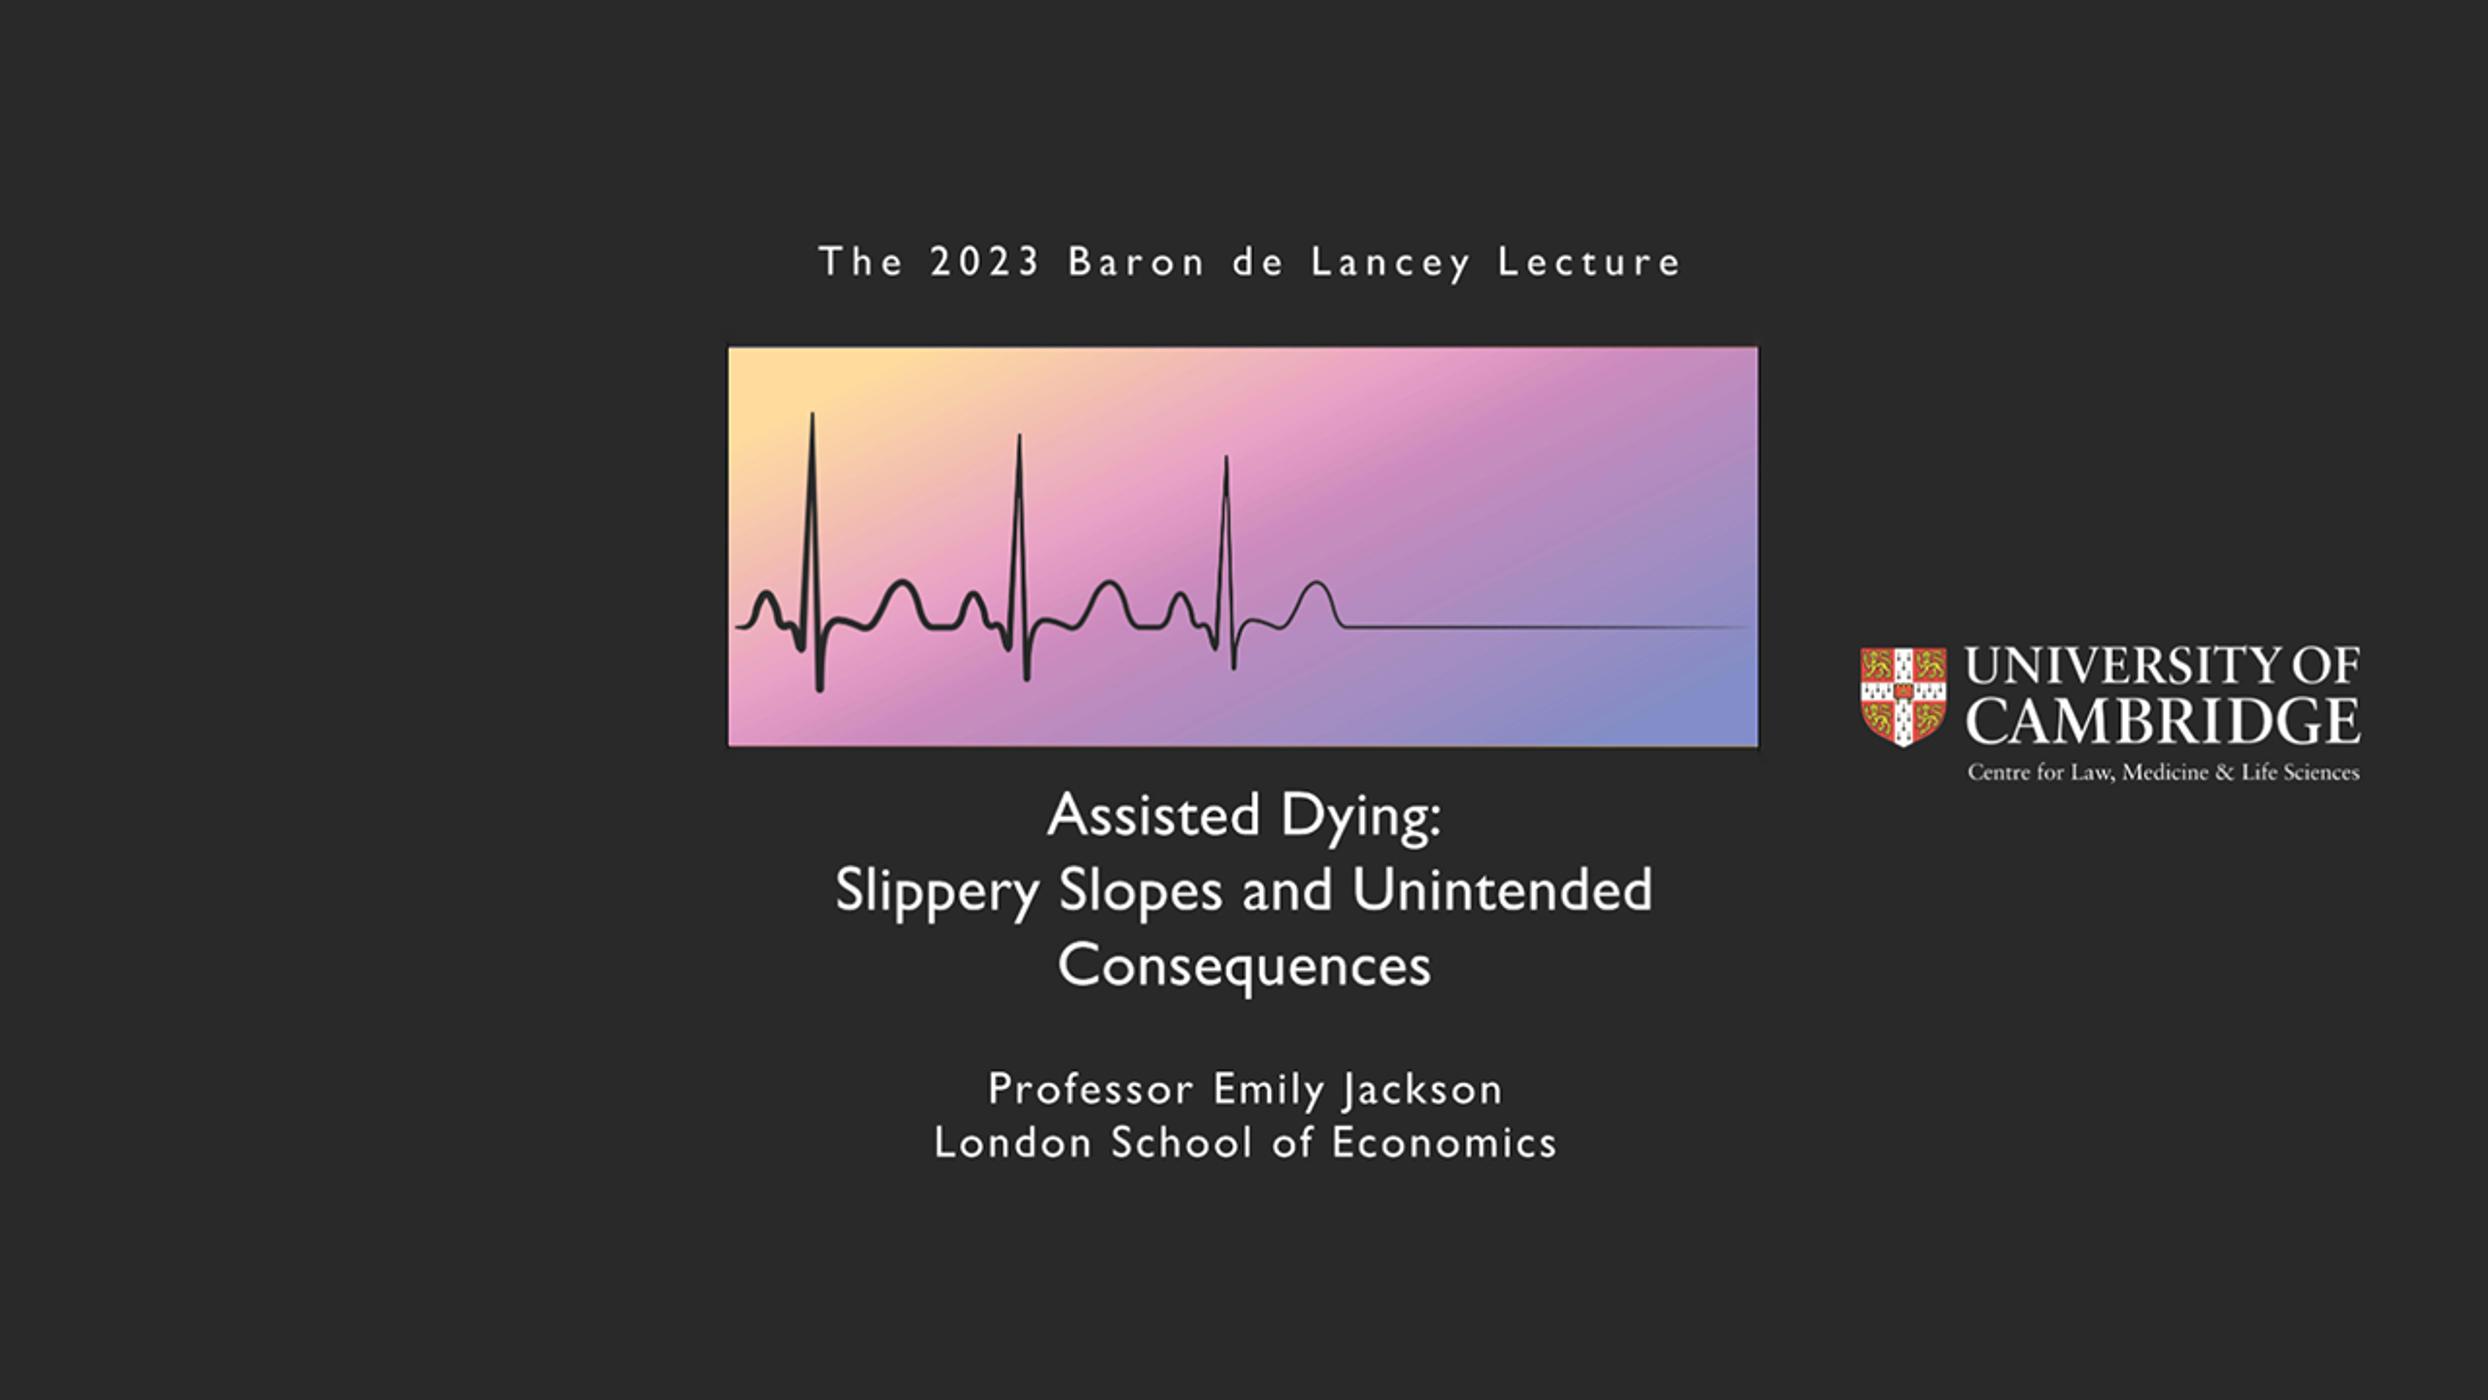 'Assisted Dying: Slippery Slopes and Unintended Consequences': The Baron de Lancey Lecture 2023 (audio)